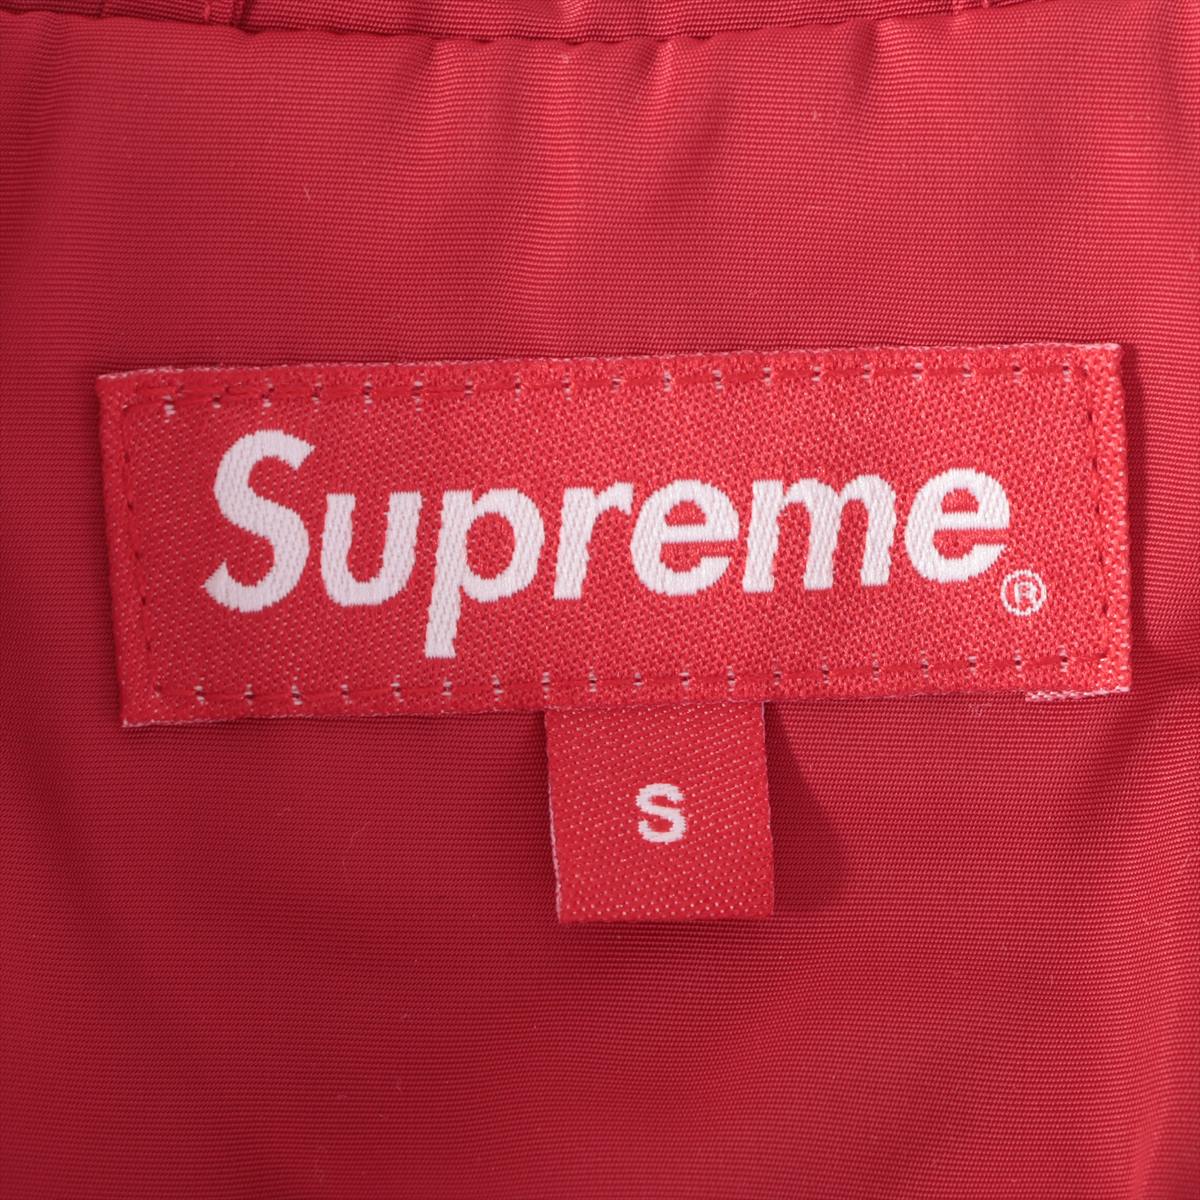 Supreme 19SS Polyester Coach jacket S Men's Red  Apple Coaches Jacket